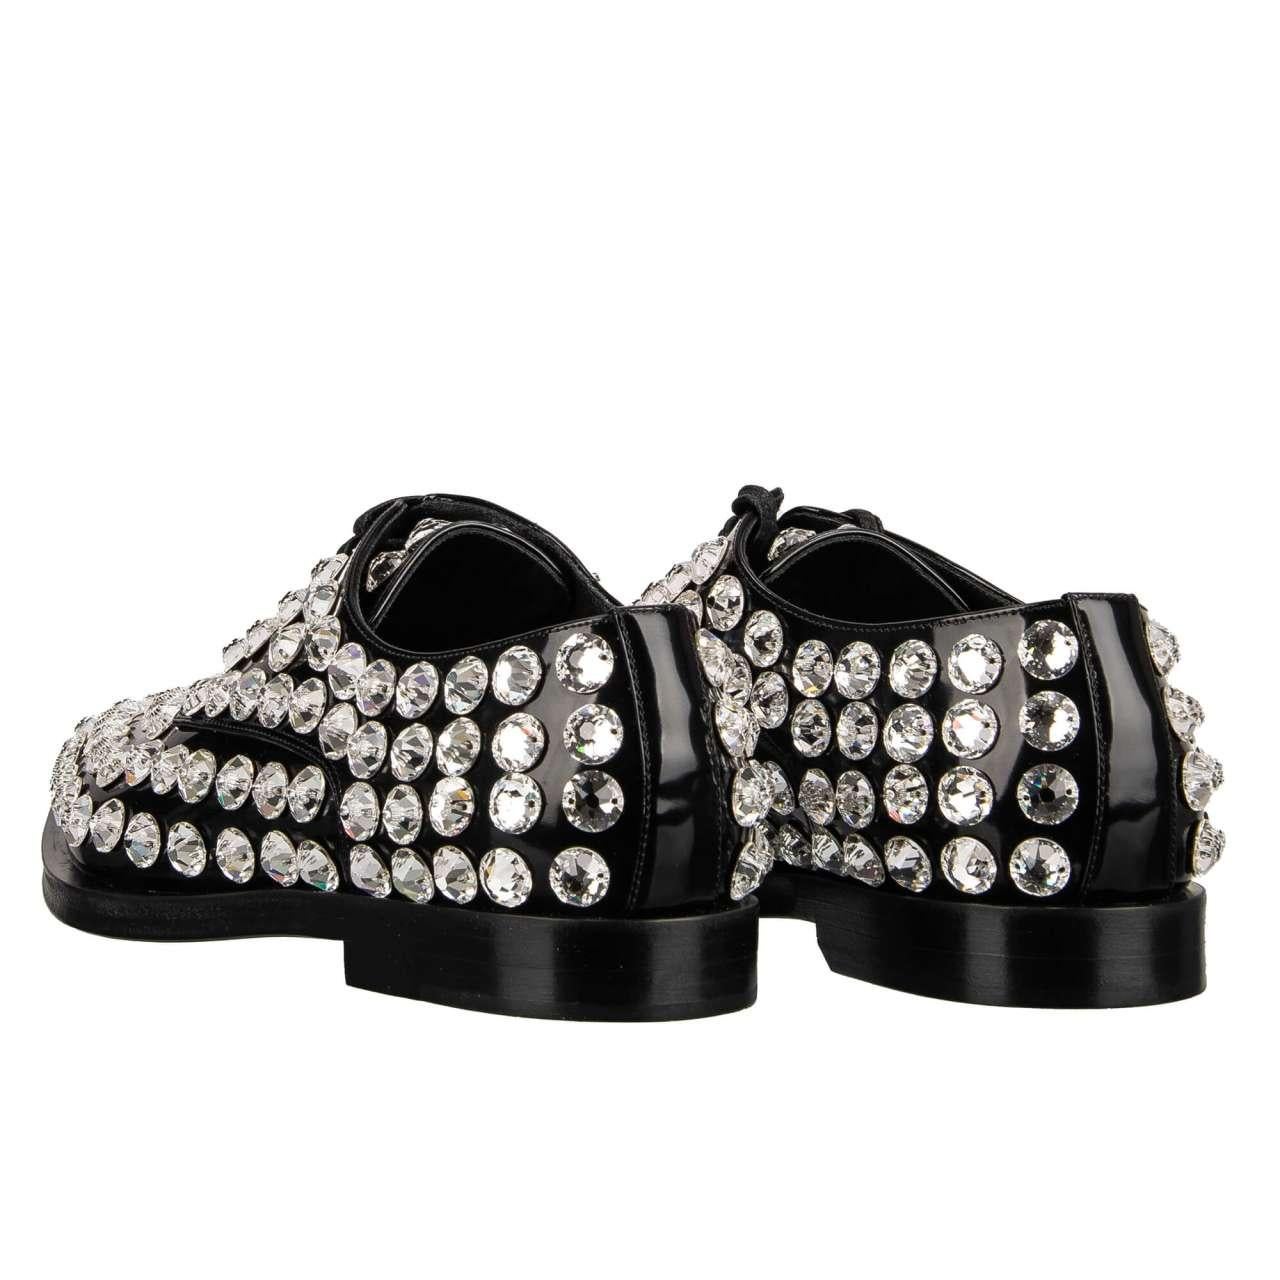 Dolce & Gabbana - Crystal Classic Leather Shoes MILLENIALS Black 39 US 9 For Sale 2